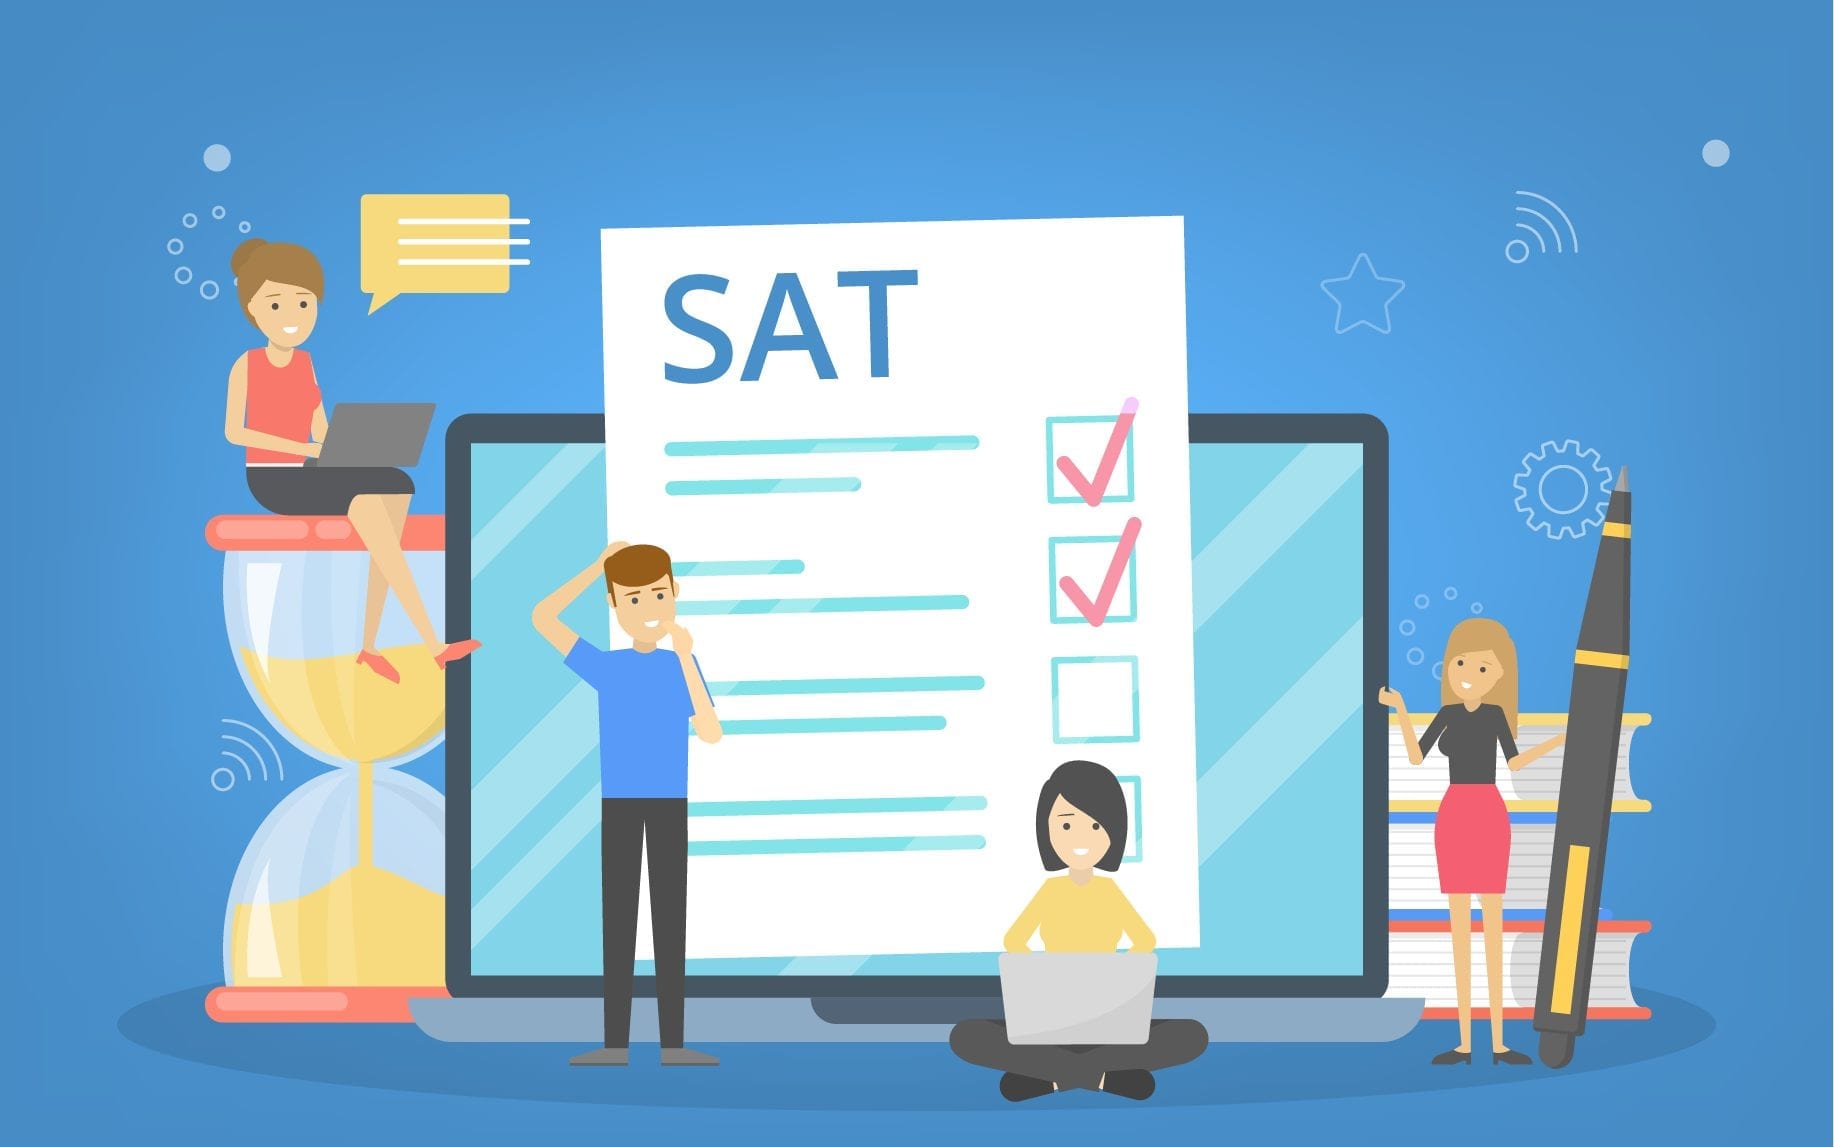 Retaking the SAT could get more students to college-